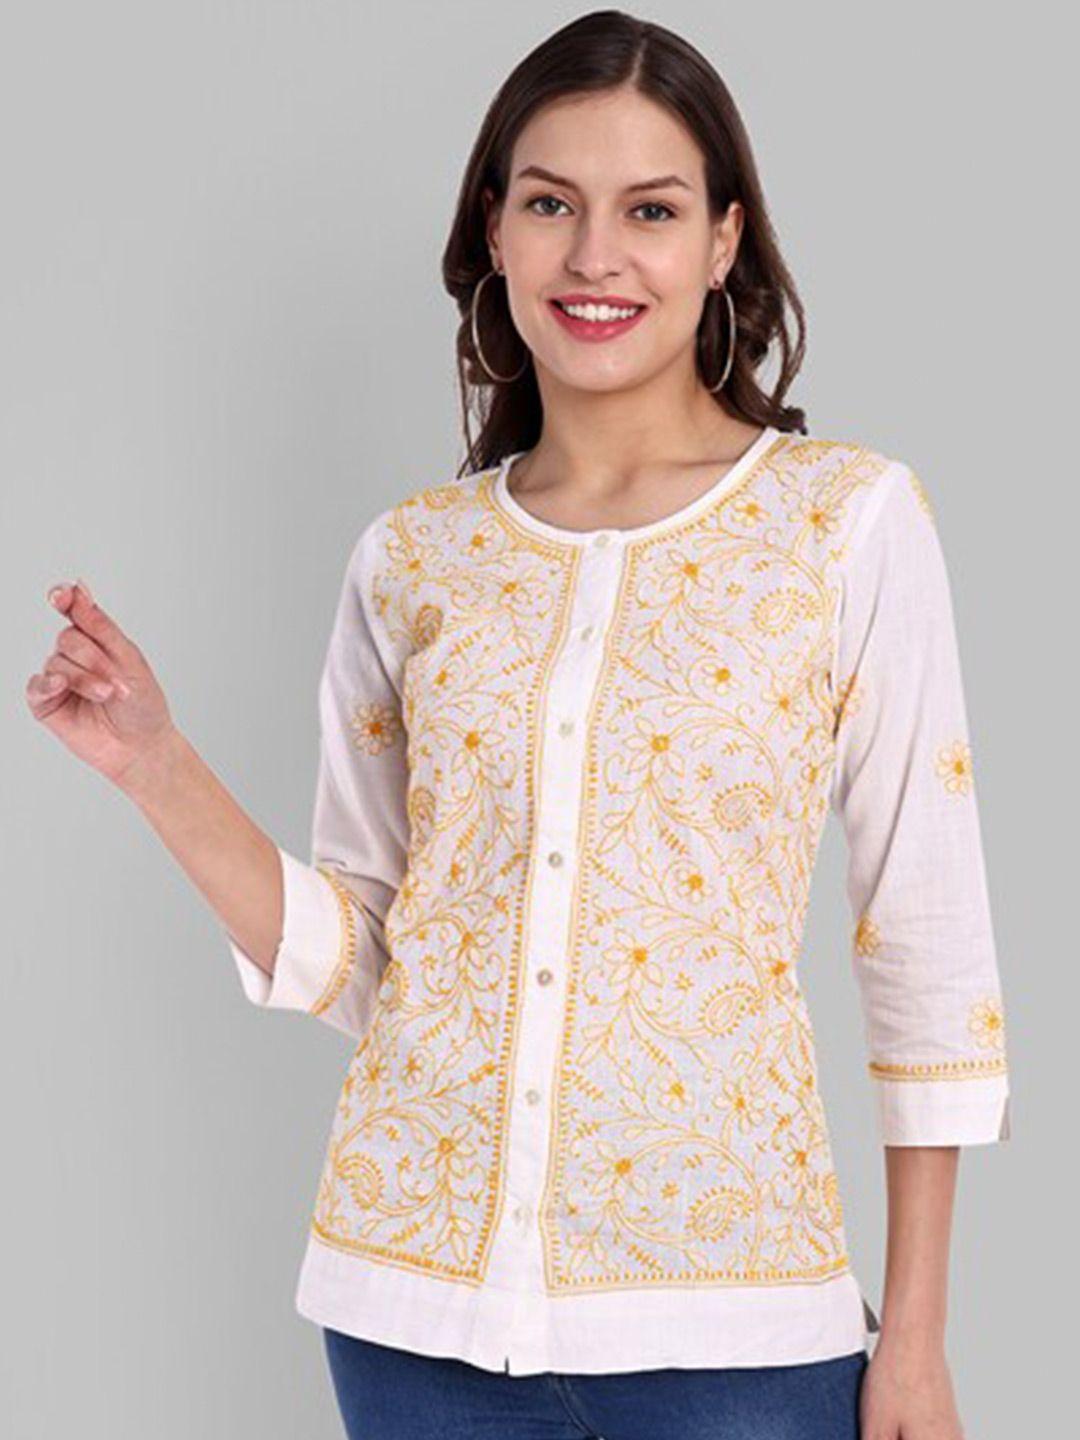 ada floral embroidered cotton shirt style top